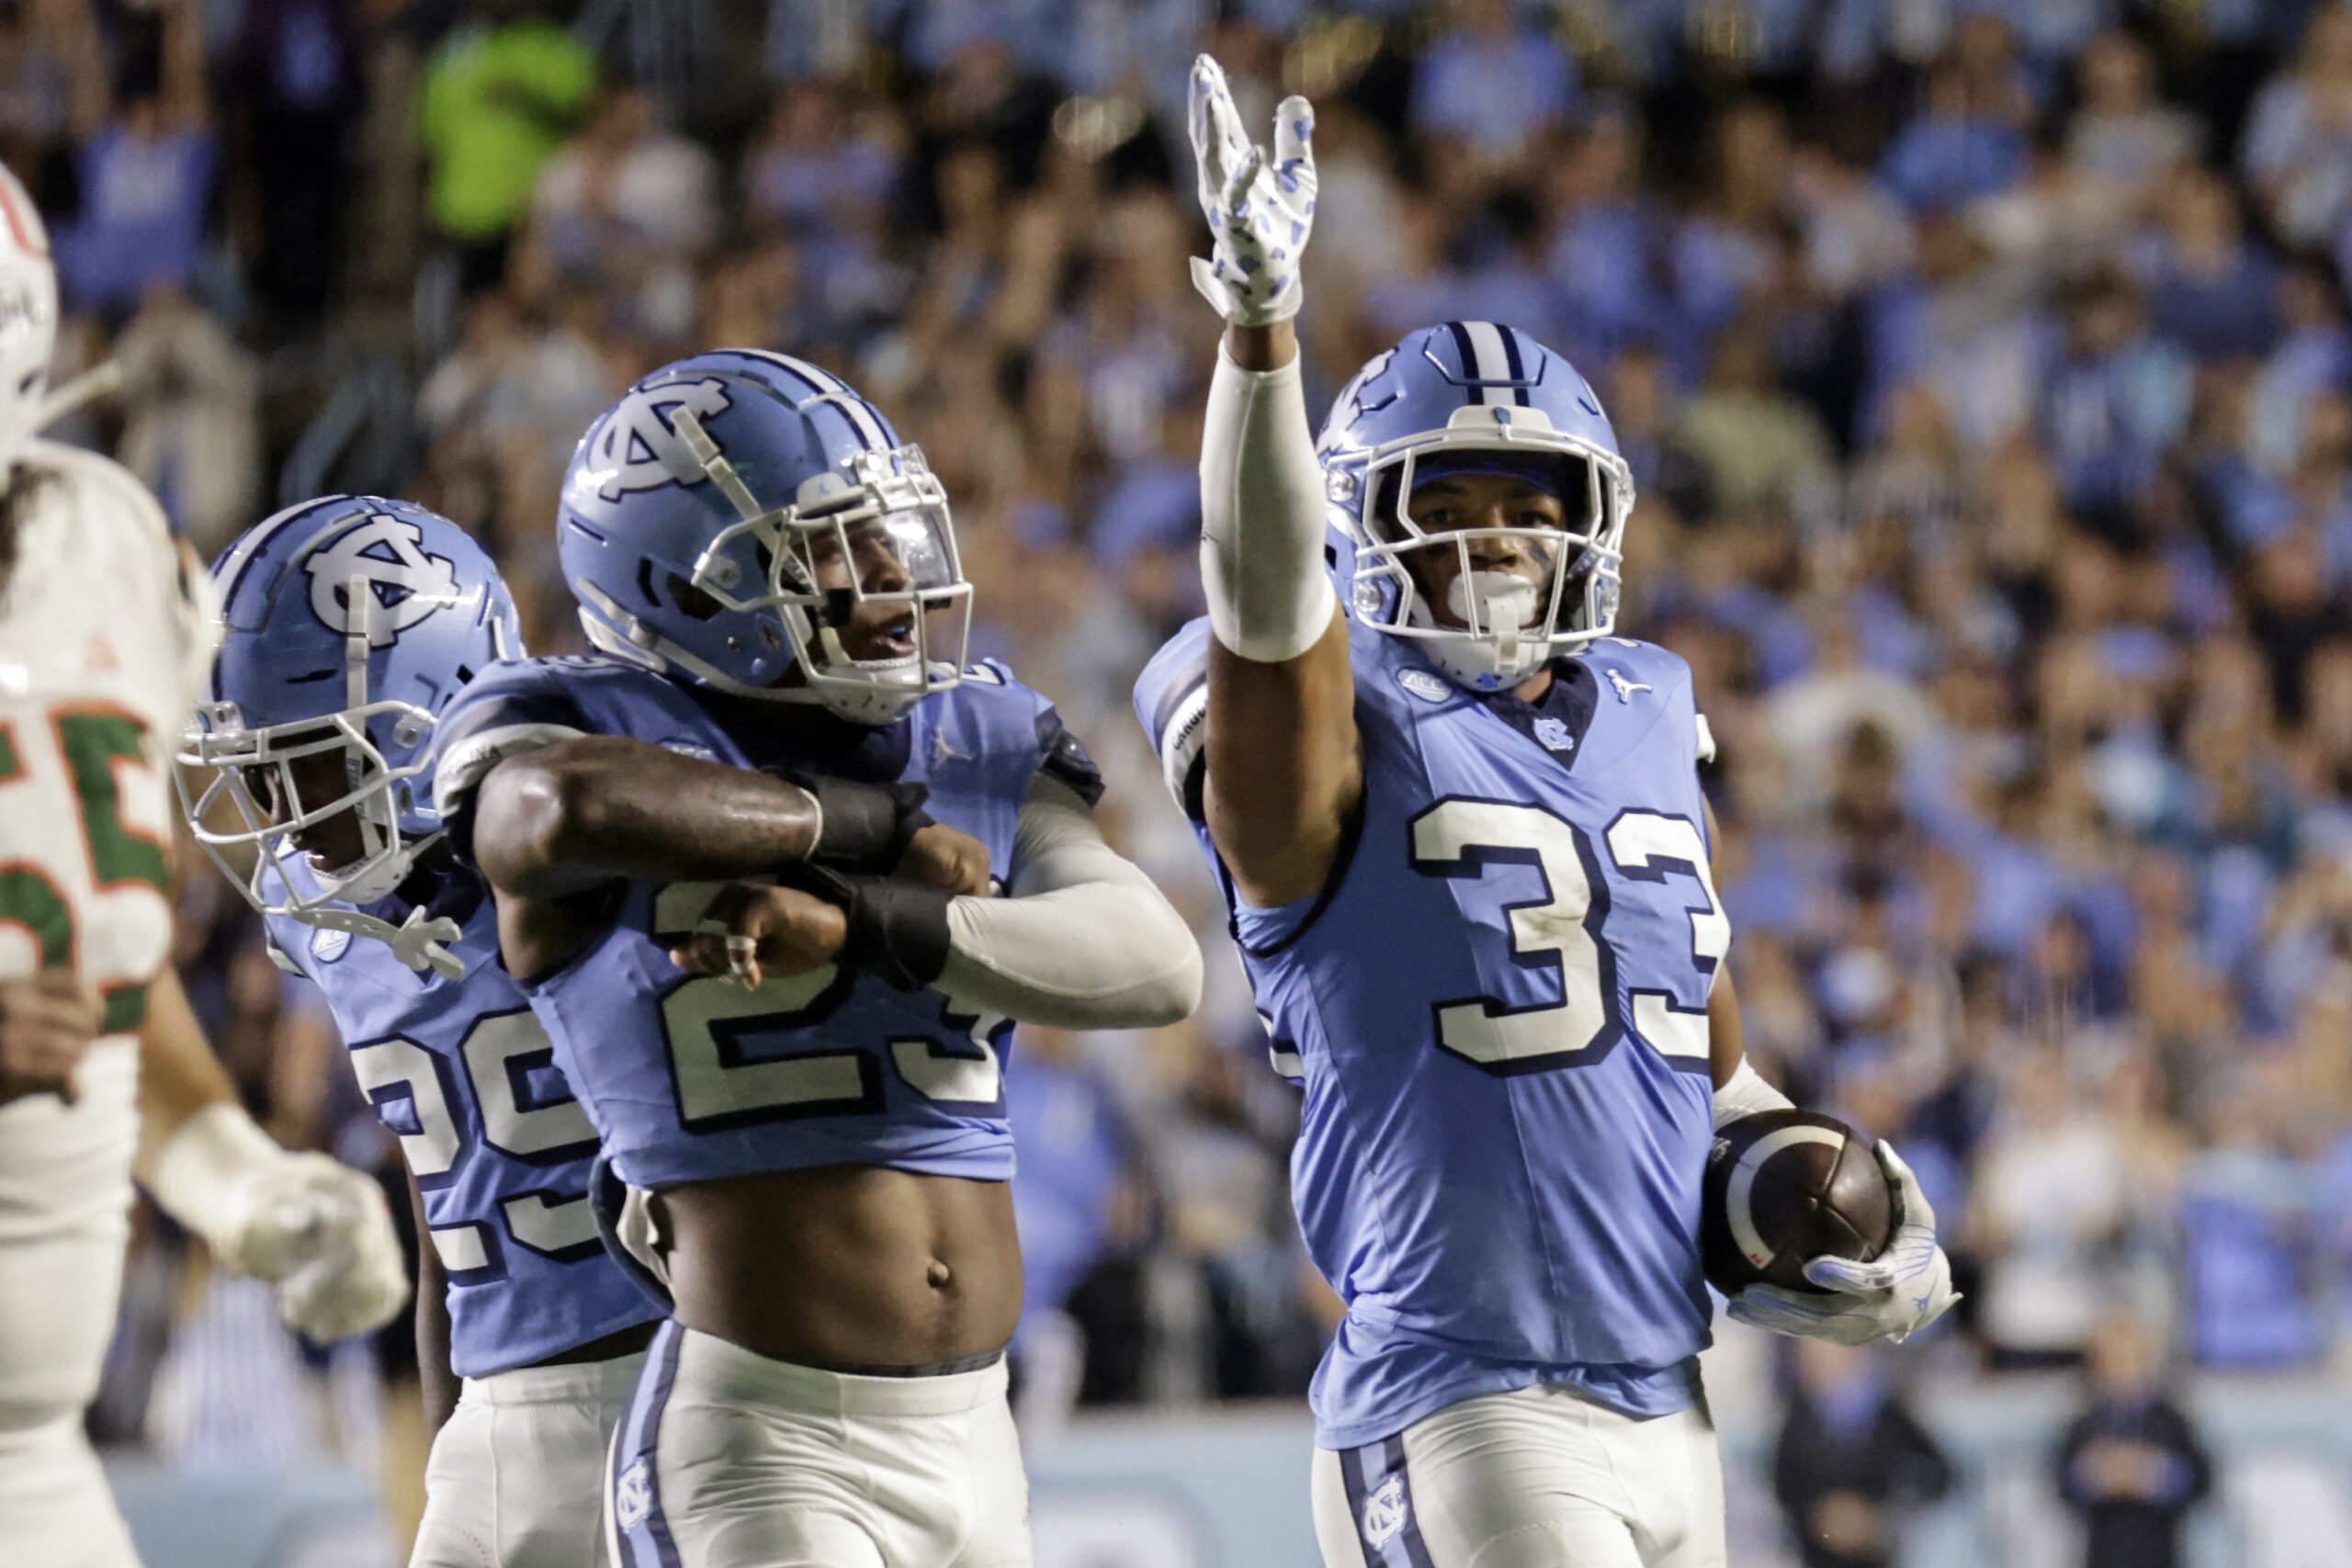 UNC Football Ready for Emotional Battle with Duke